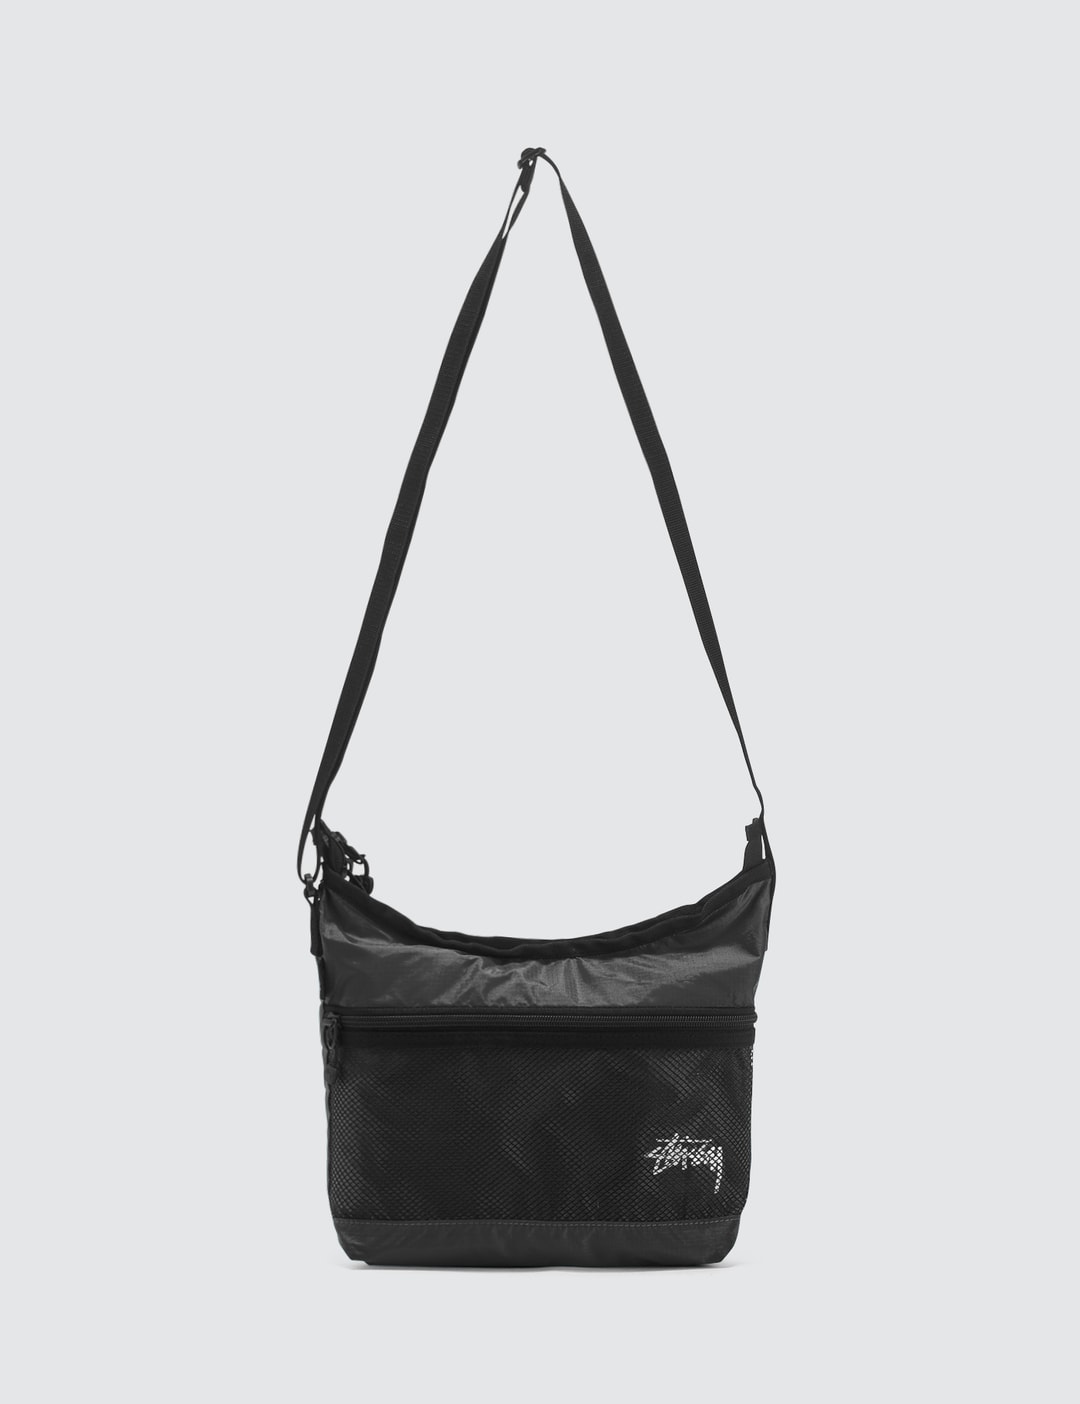 Stüssy - Light Weight Shoulder Bag | HBX - Globally Curated Fashion and ...